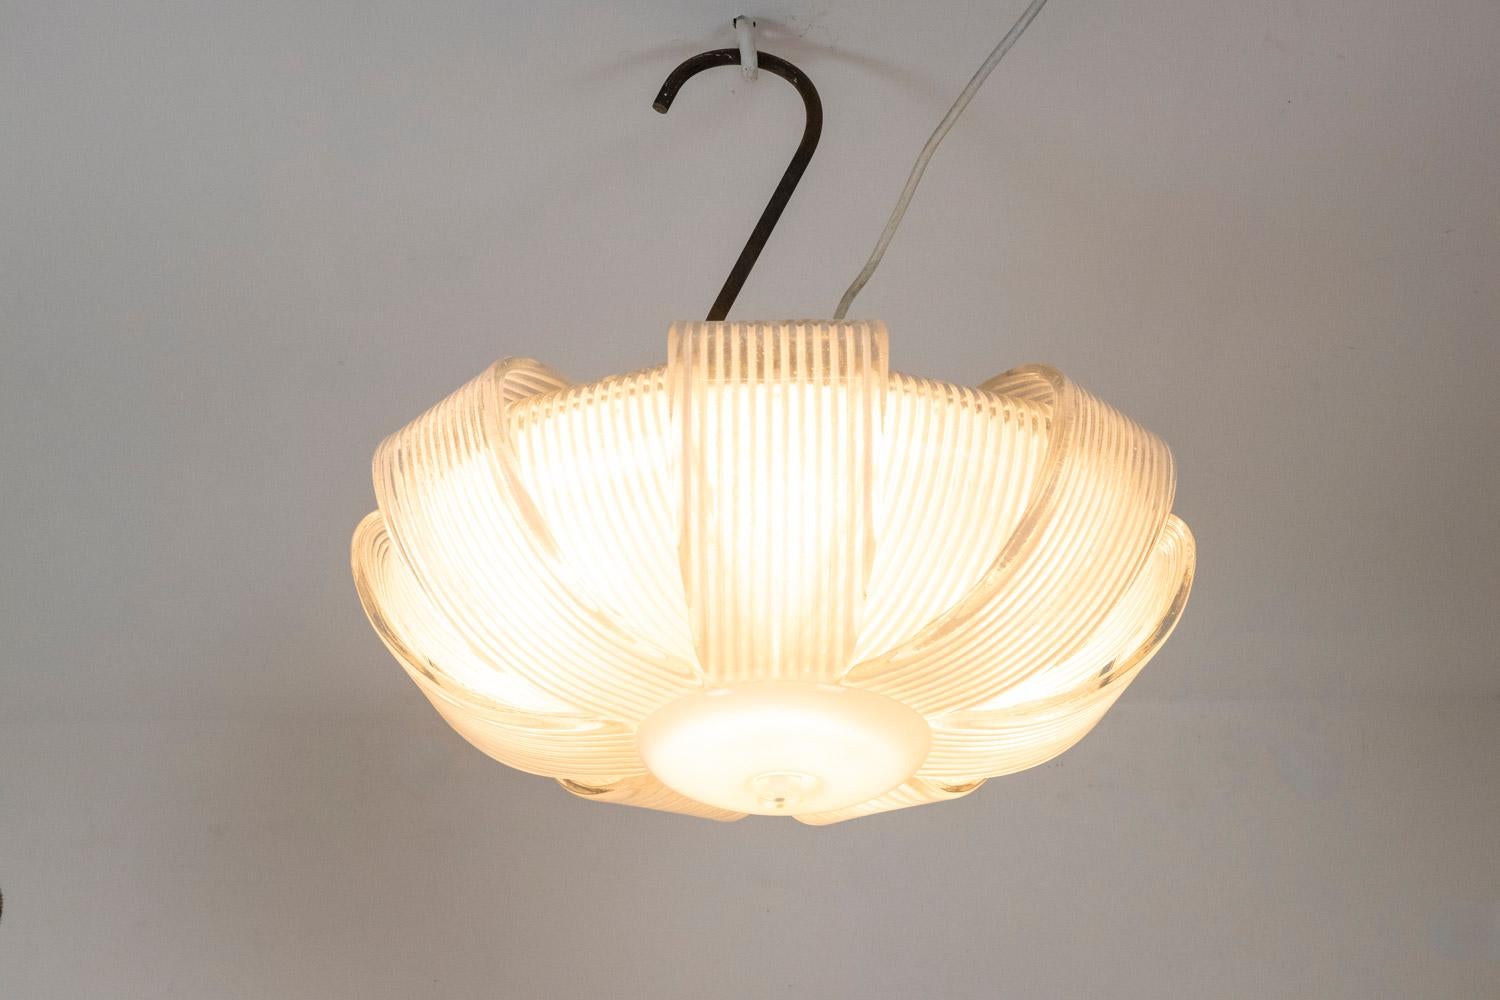 Barovier & Toso, by.

Ceiling lamp, in Murano glass, striated and circular in shape, white and transparent.

Italian work realized in the 1940s.